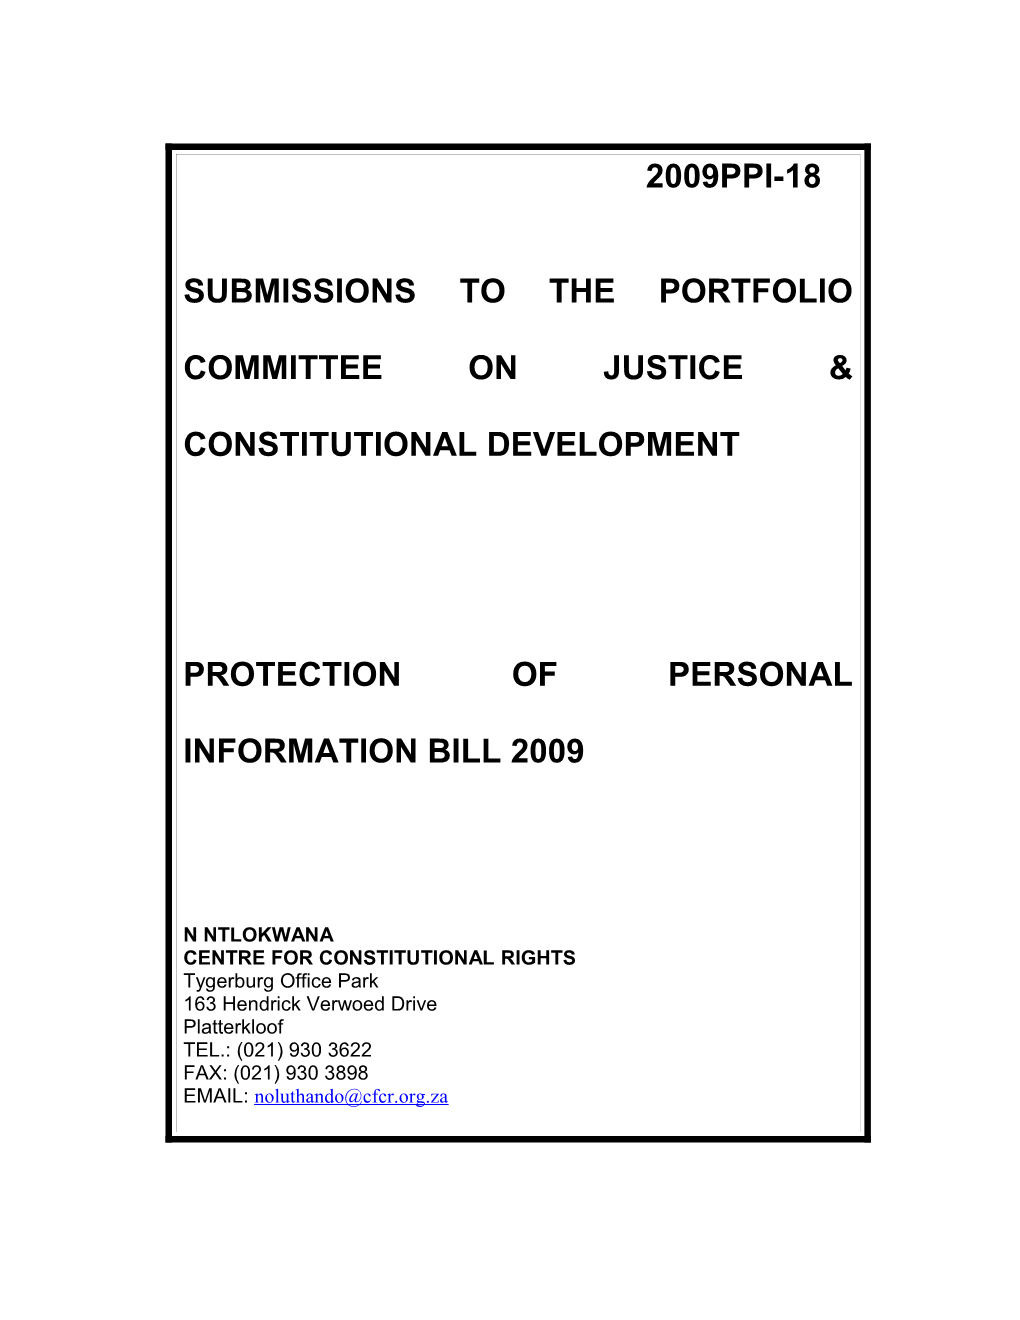 Submissions to the Portfolio Committee on Justice & Constitutional Development